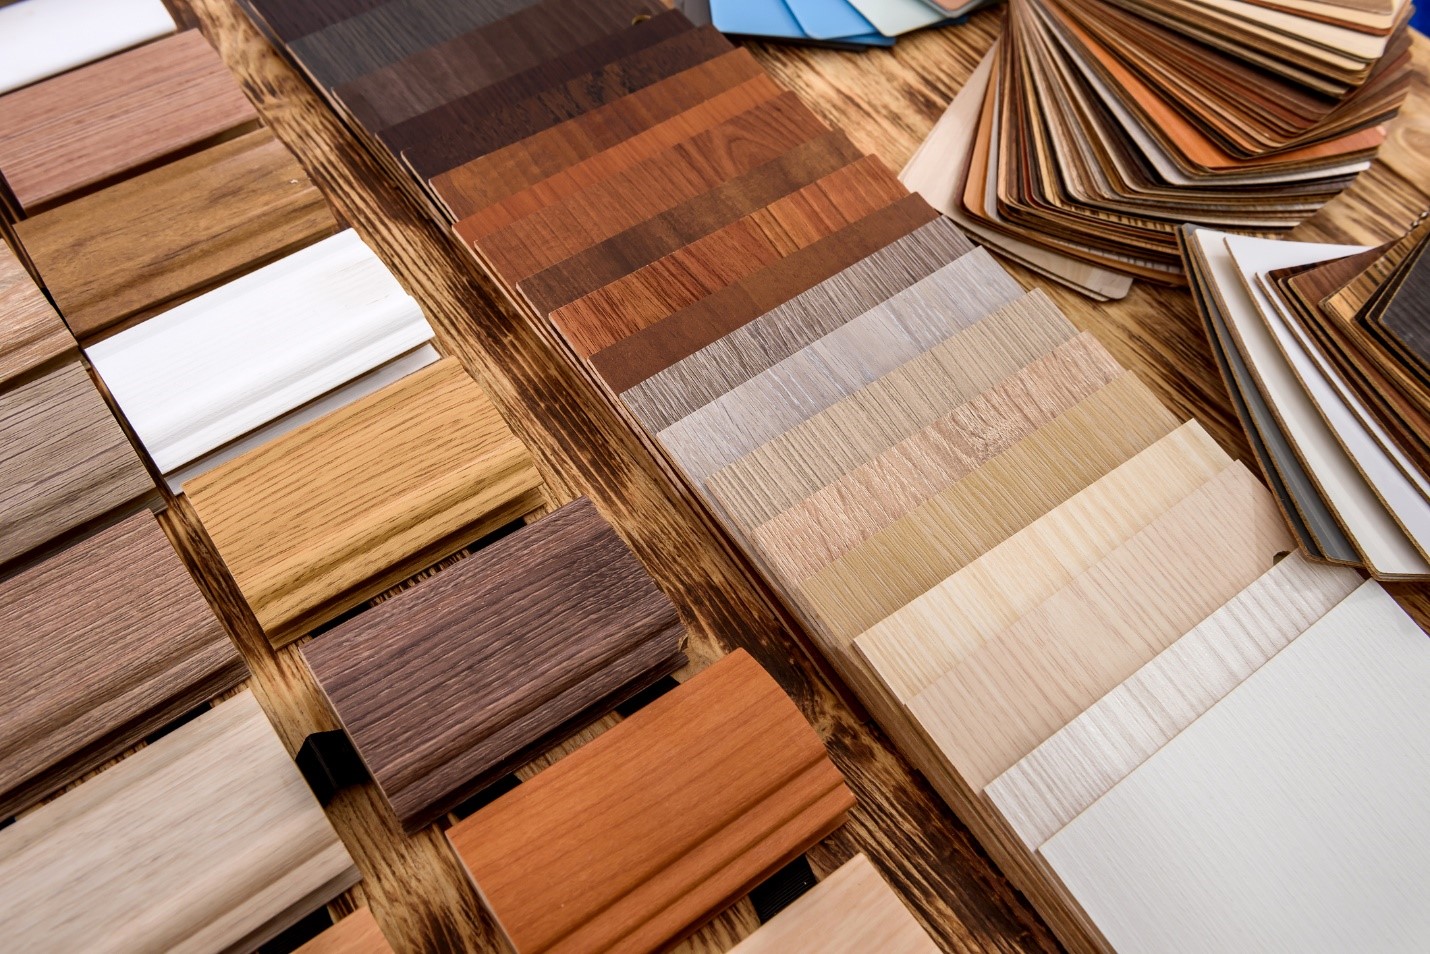 Various wood color and wood stain swaths are neatly spread out